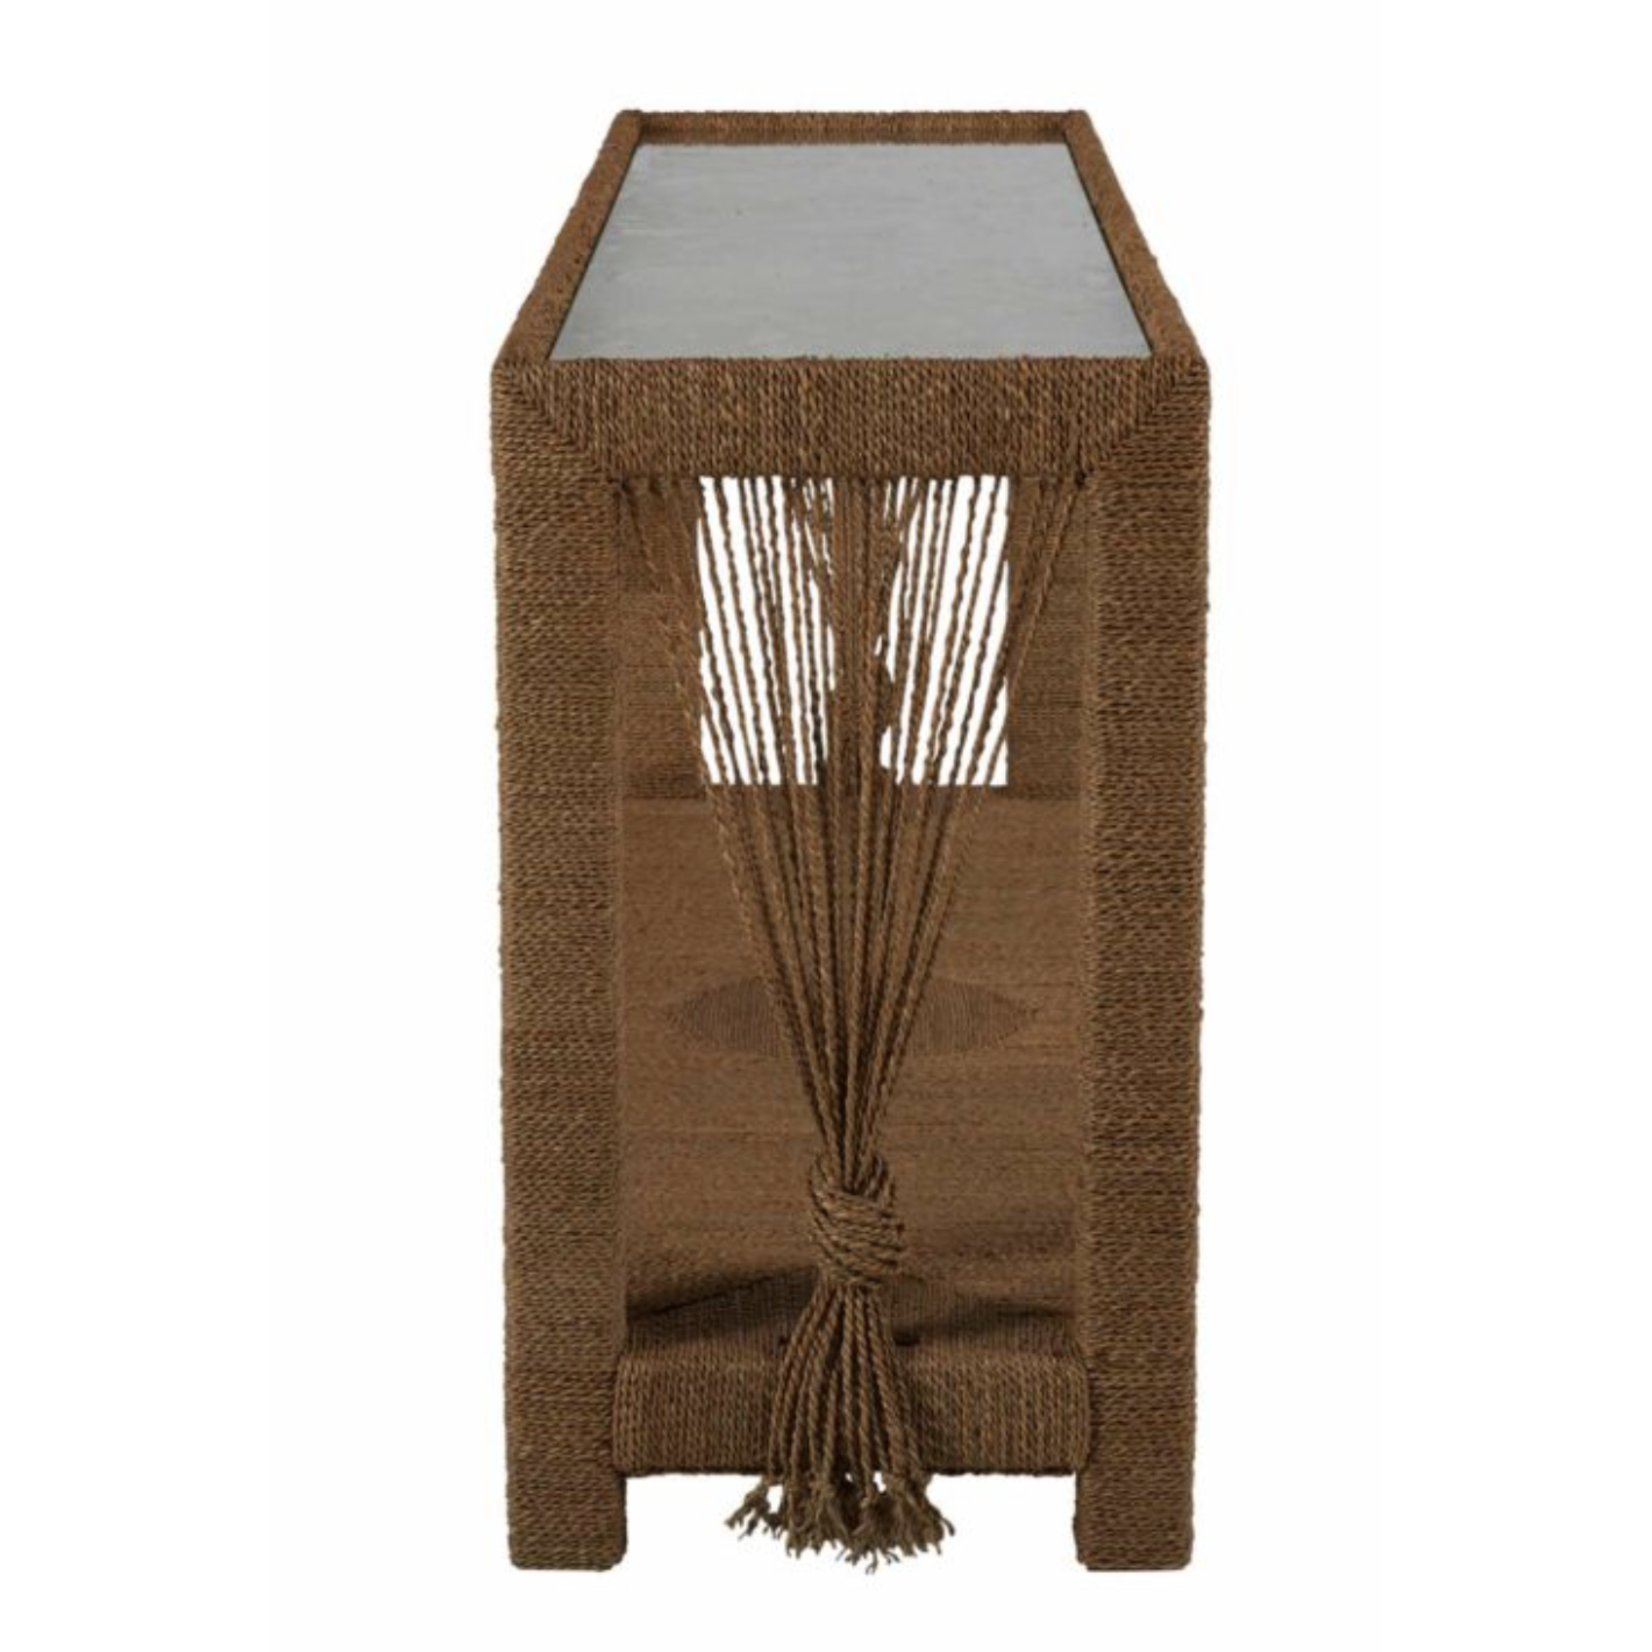 Outside The Box 70x18x32 Gabby Mindi Wood Woven Seagrass Rope Console W/ Glass Top